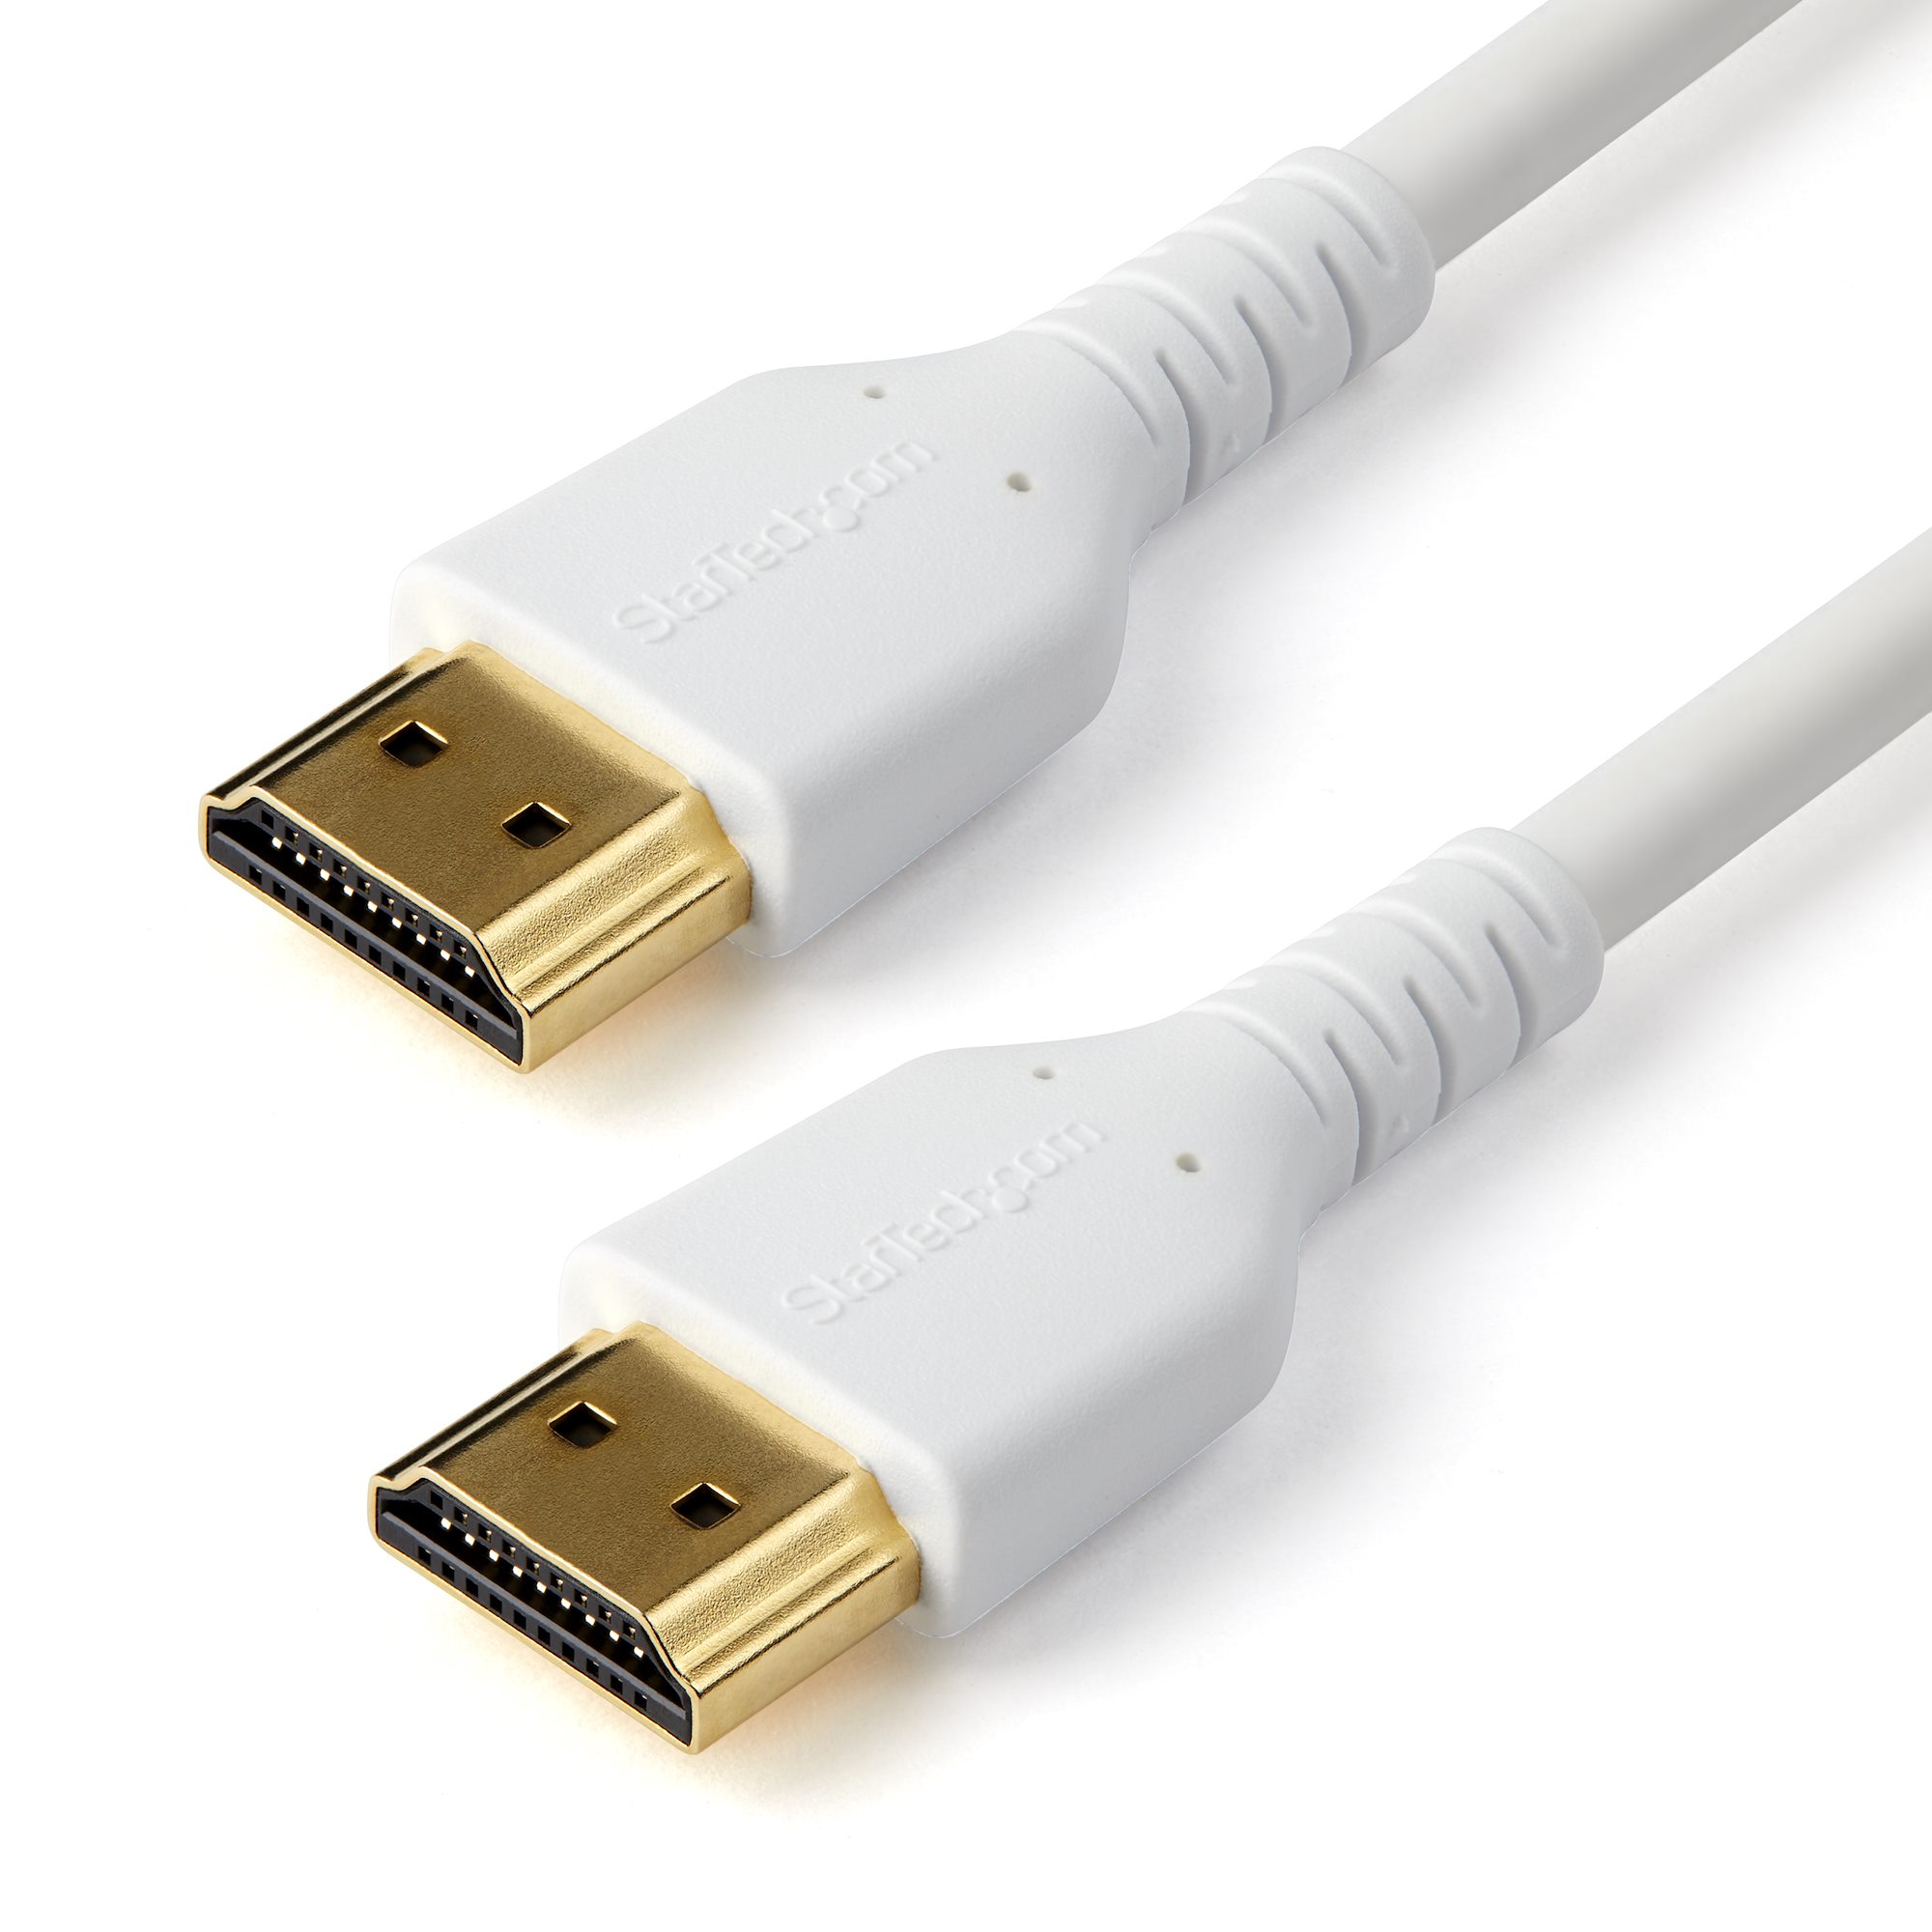 6.6ft (2m) High Speed HDMI® to Mini HDMI Cable with Ethernet - 4K 60Hz